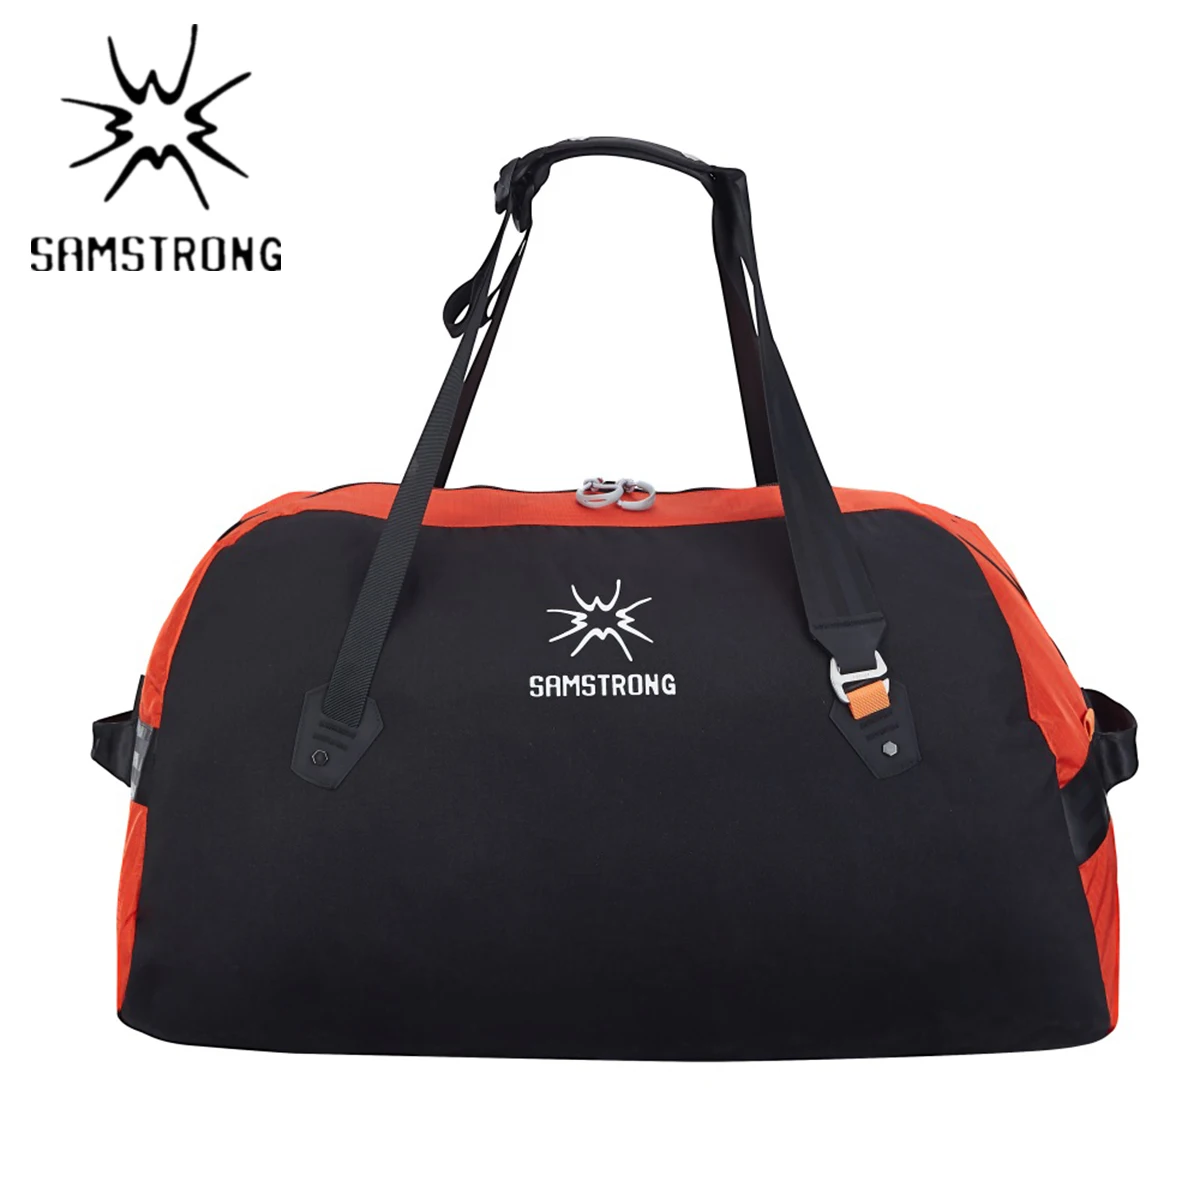 Large Capacity 70L Outdoor Sports Gym Fitness Yoga Travel Portable Handle Bag For Sport Trekking Camping Bags Man Woman